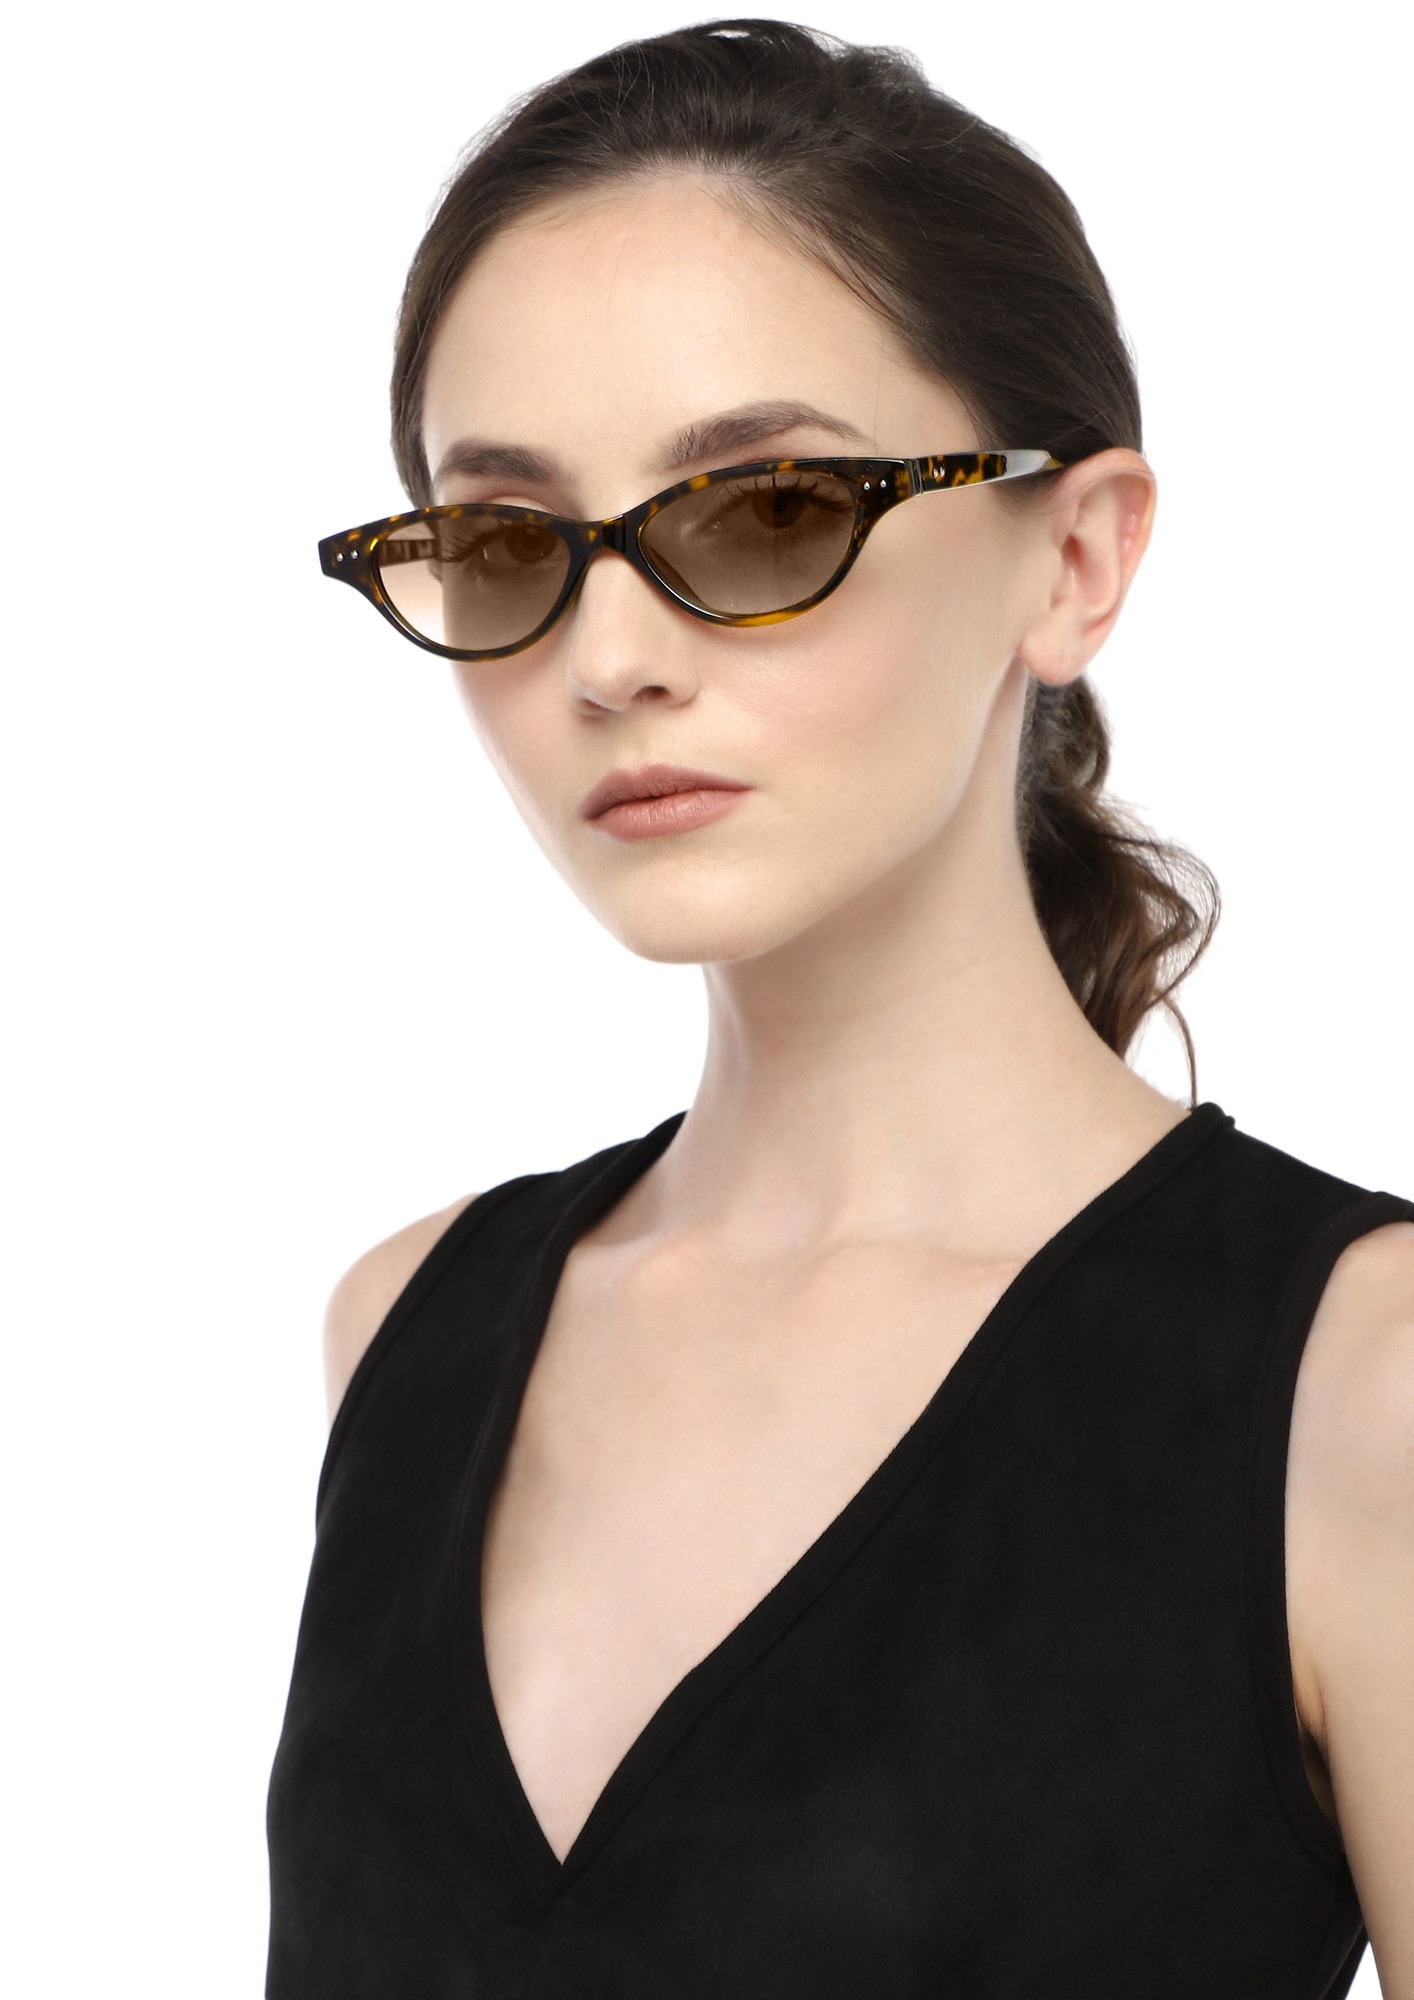 ONLY FOOLS ENVY AMBER BROWN RETRO SUNGLASSES